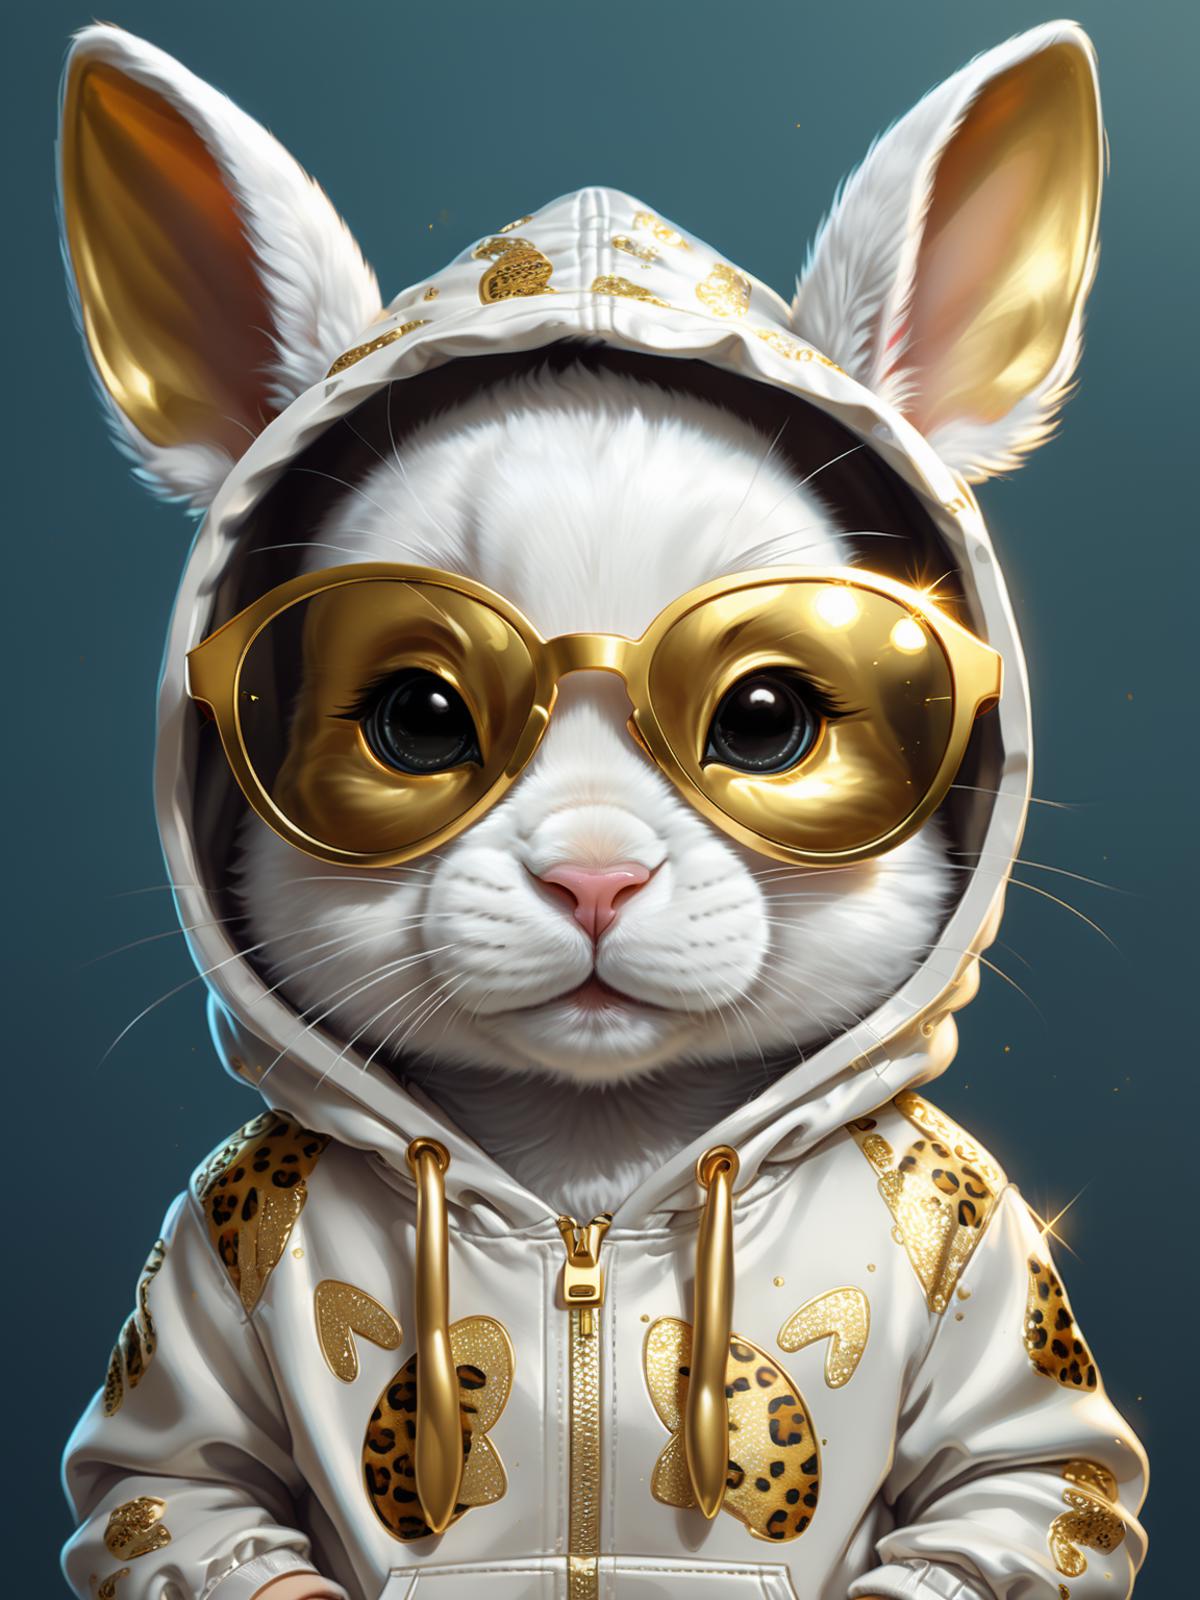 Cute Bunny Rabbit Wearing Glasses and a Gold Jacket